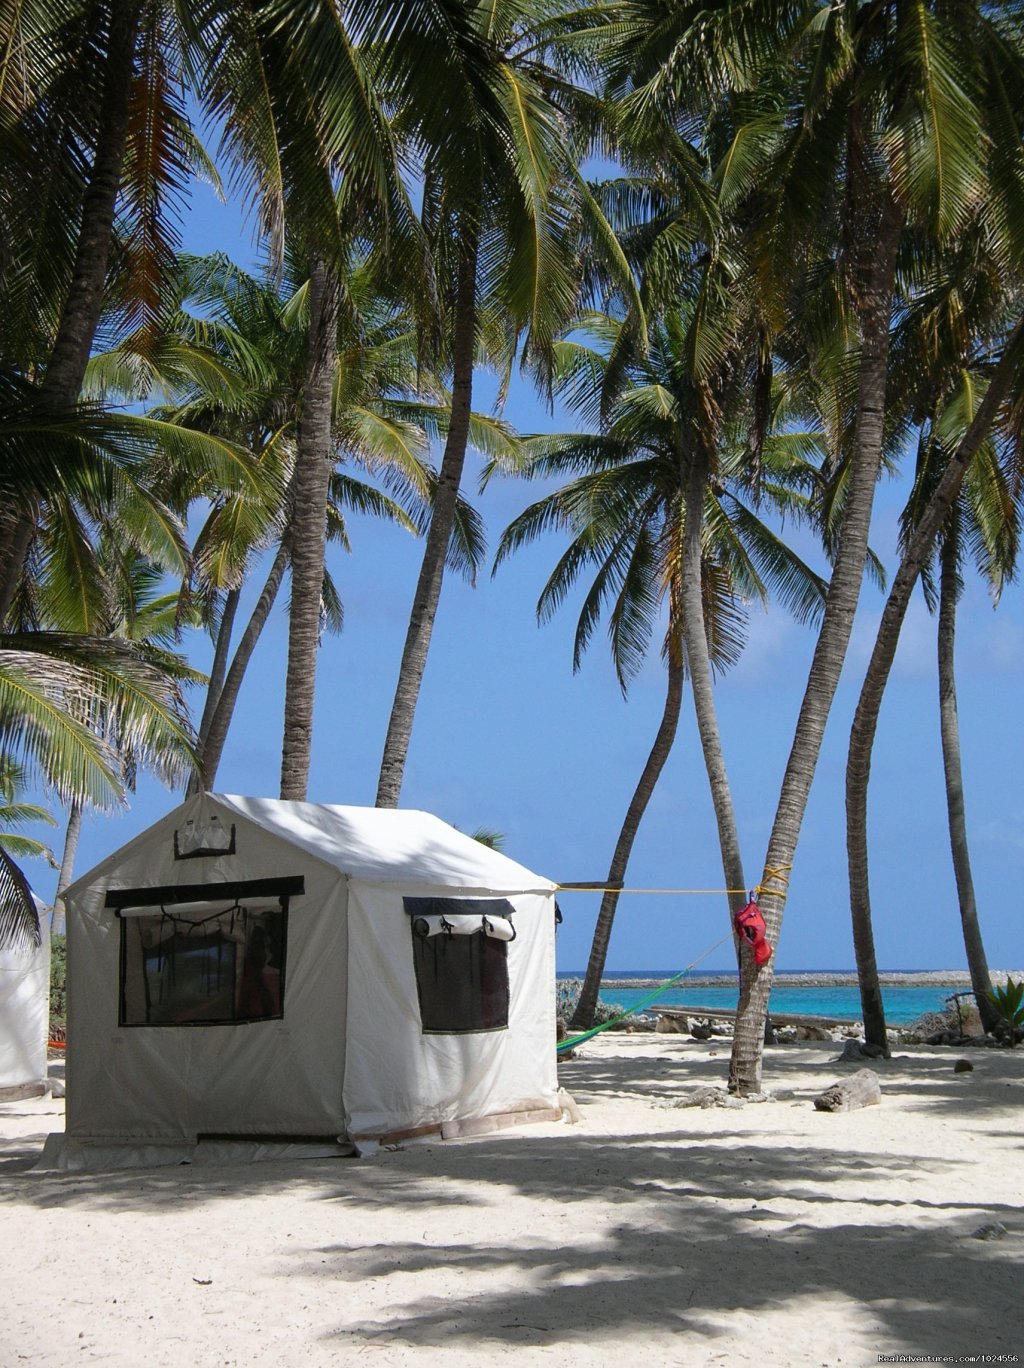 Basecamp Accommodation - Tented Cabana | Island Expeditions - Belize & Yucatan Adventures | Image #4/8 | 